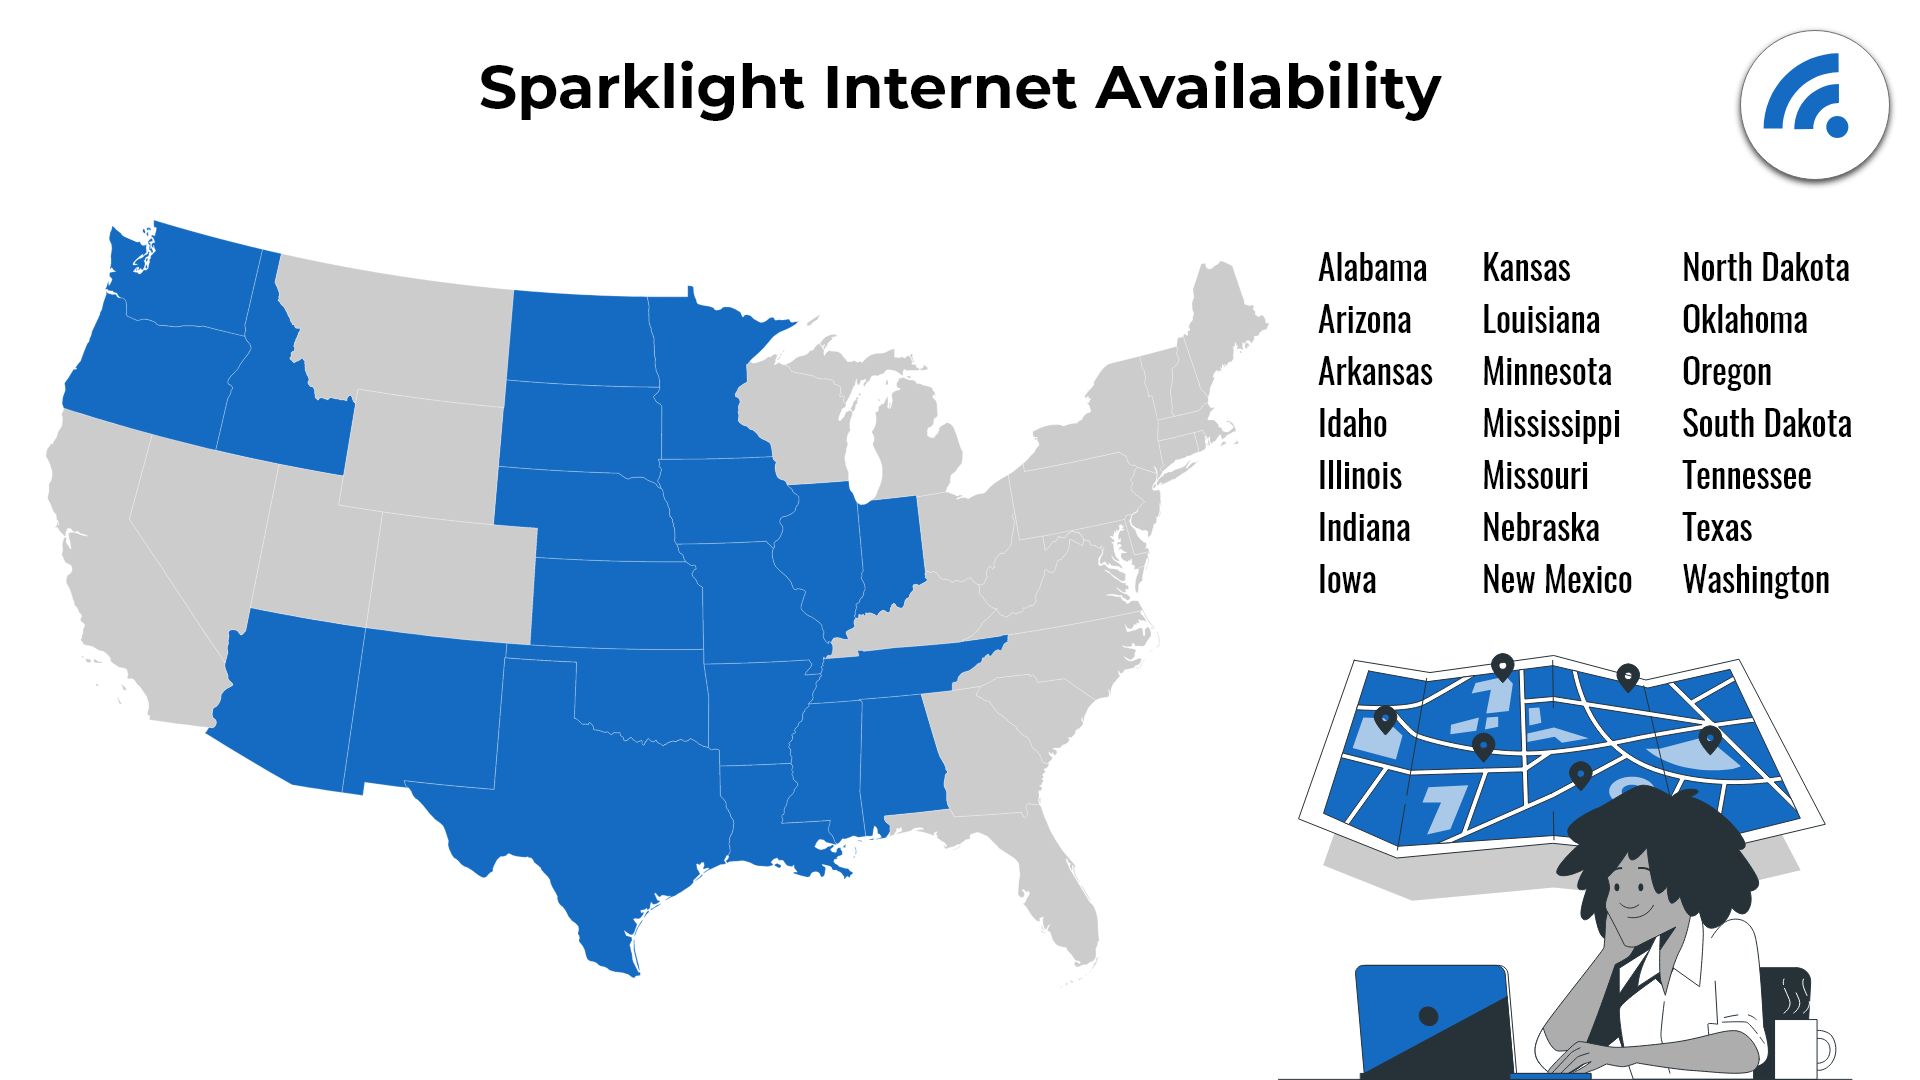 A map showing Sparklight's internet availability